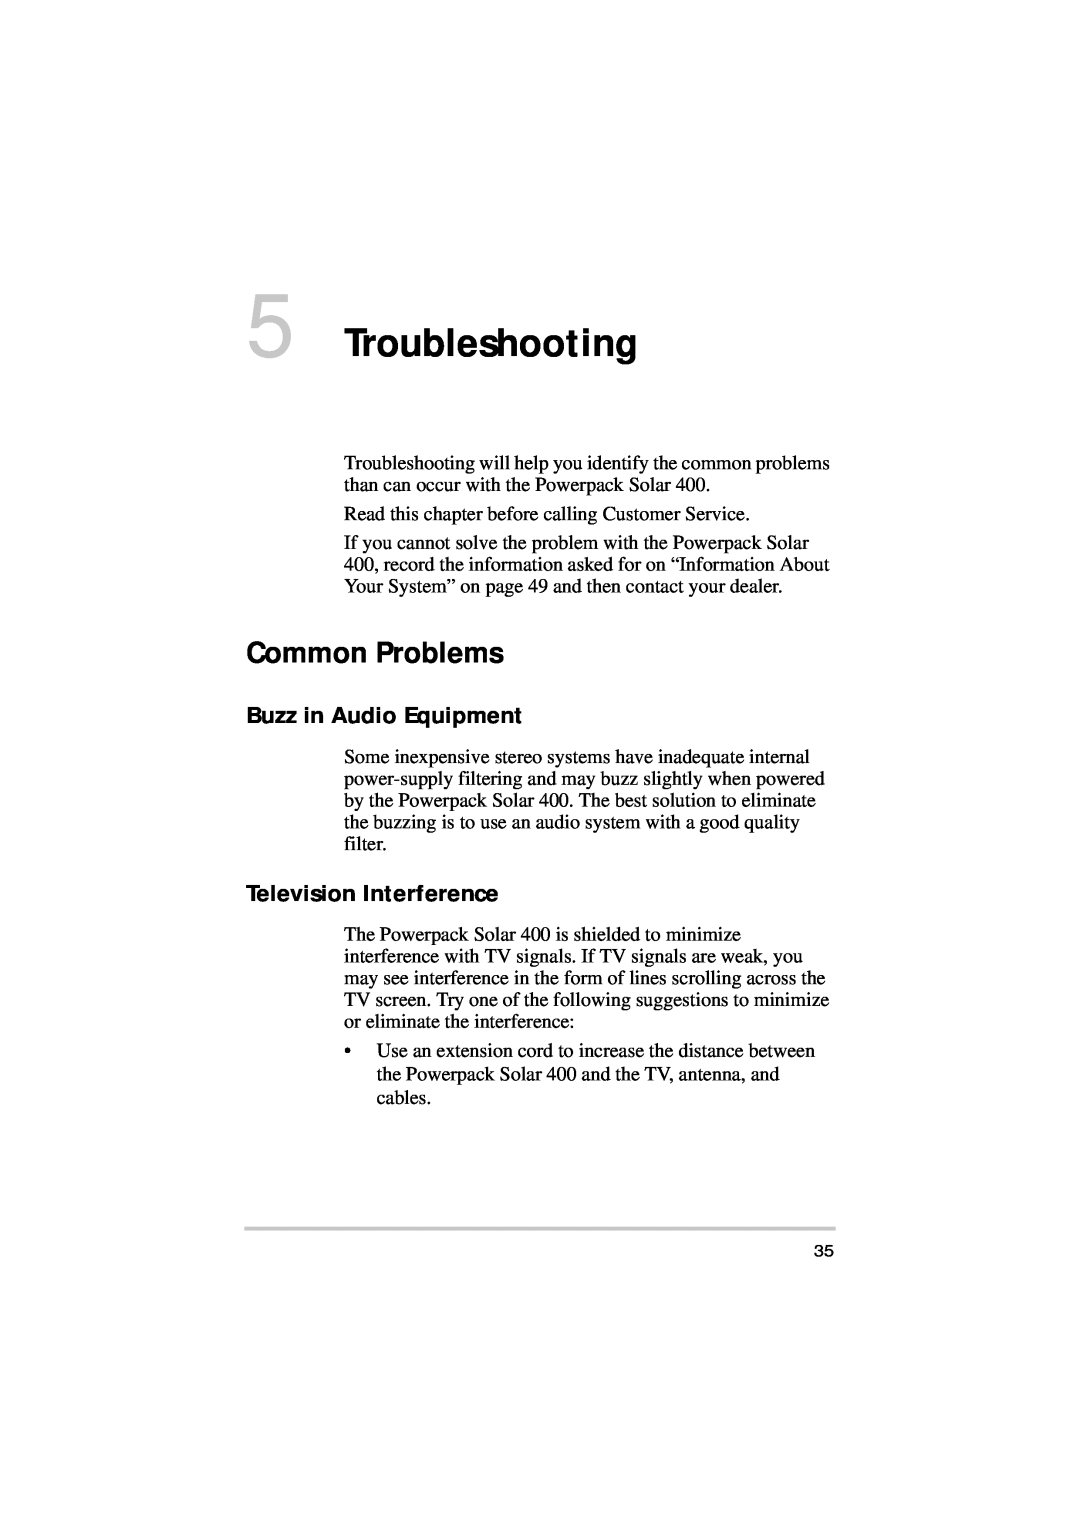 Xantrex Technology Solar 400 manual Troubleshooting, Common Problems, Buzz in Audio Equipment, Television Interference 